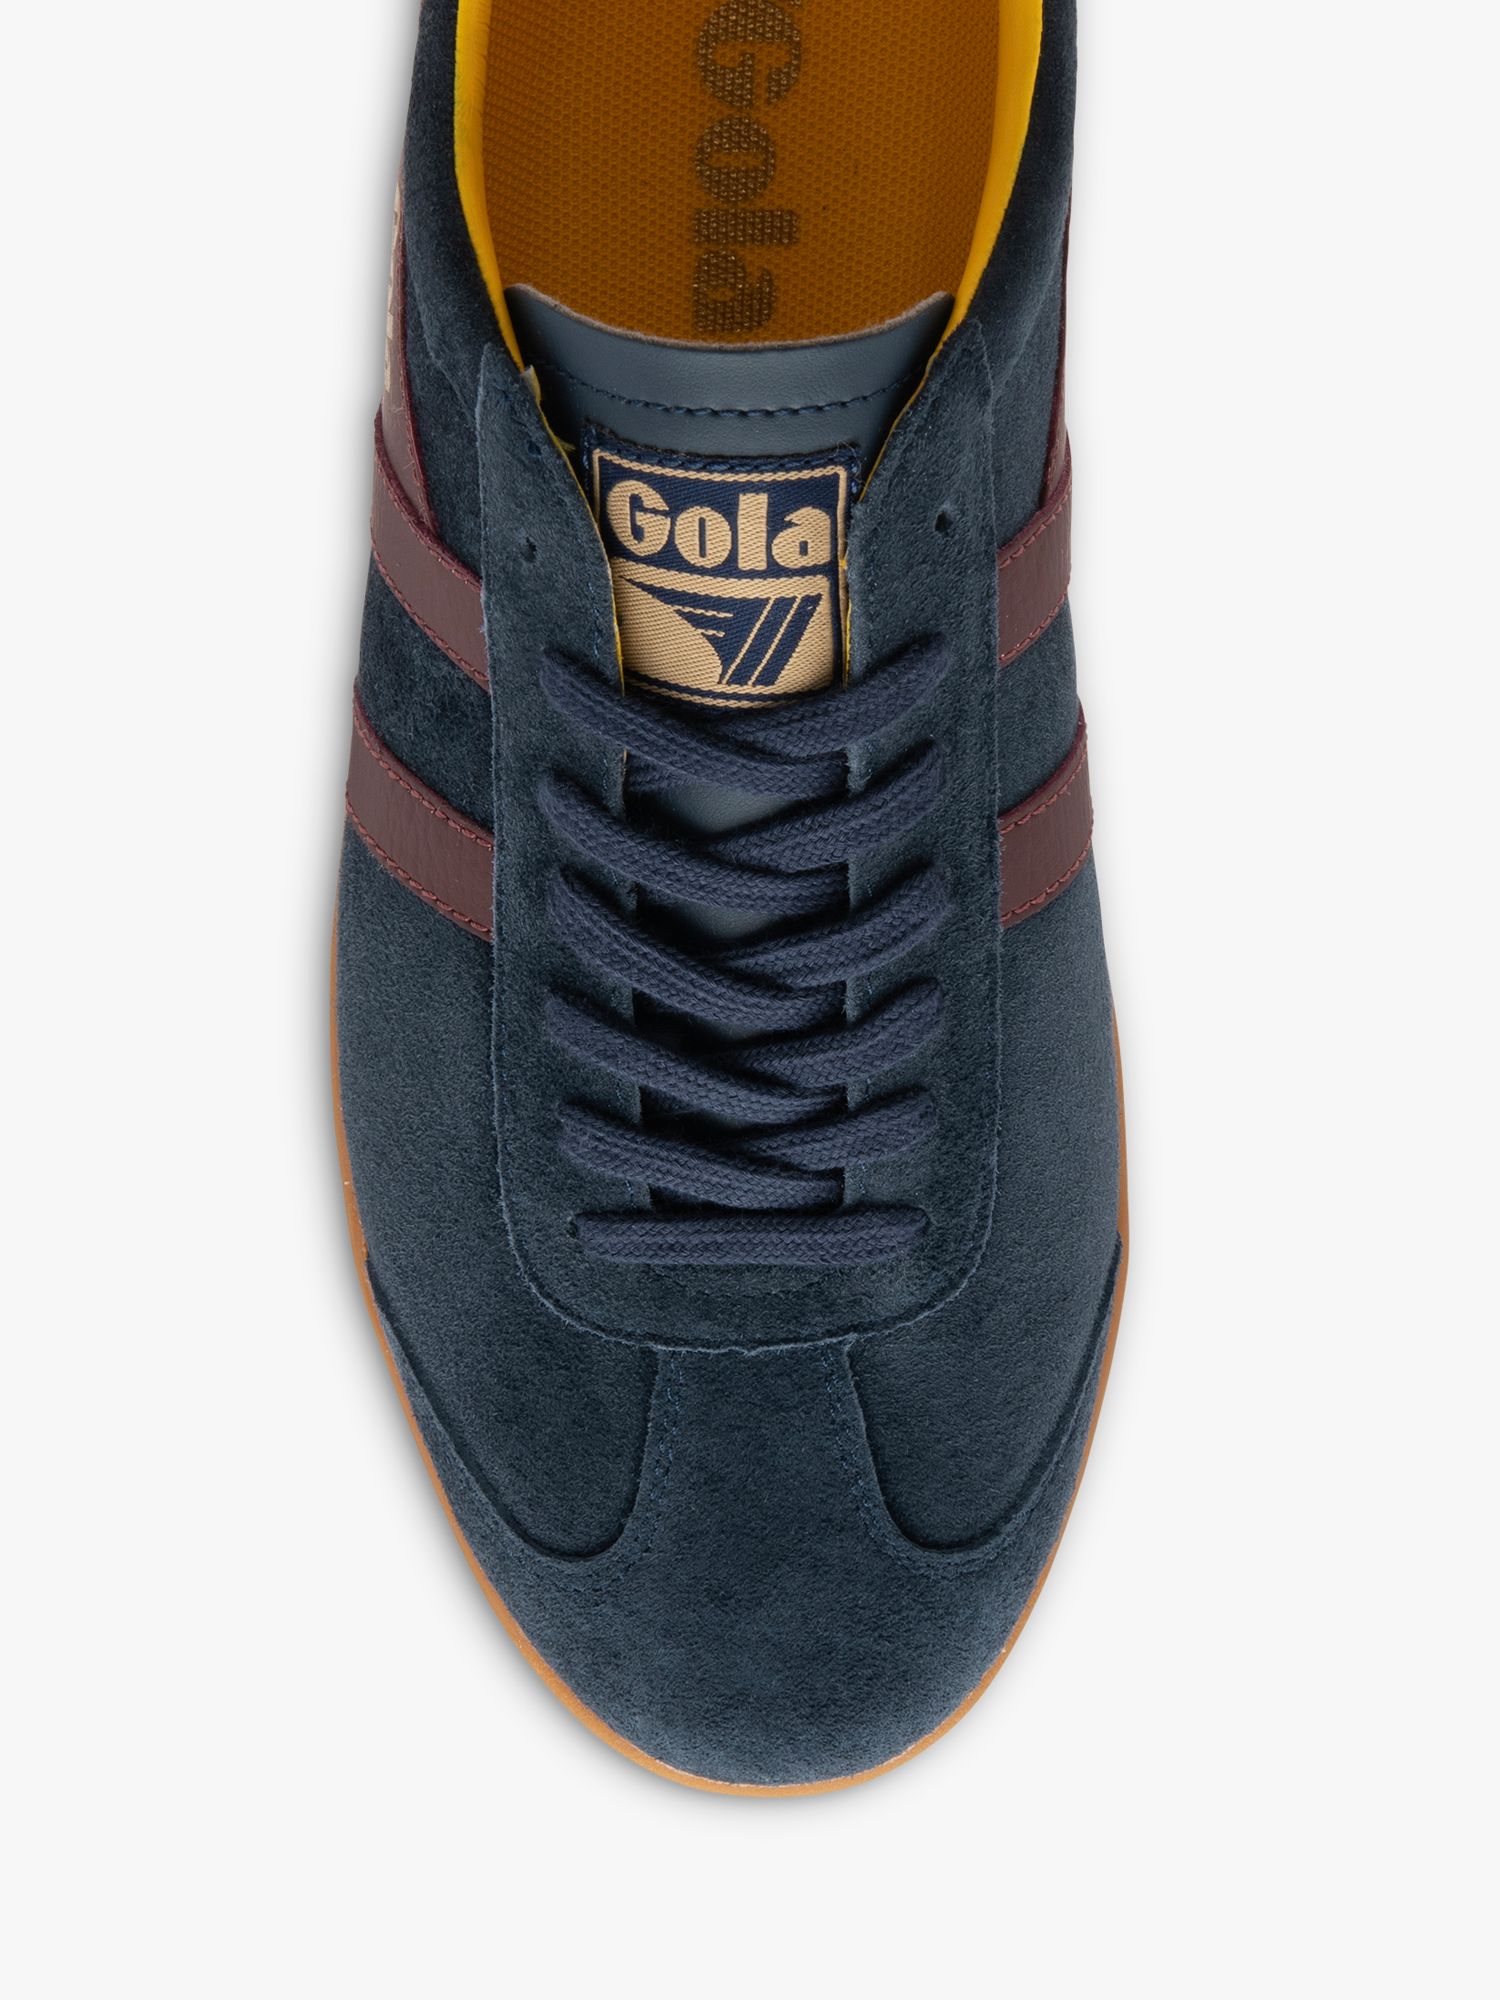 Buy Gola mens Harrier Suede sneakers blue/off white/sun online at gola